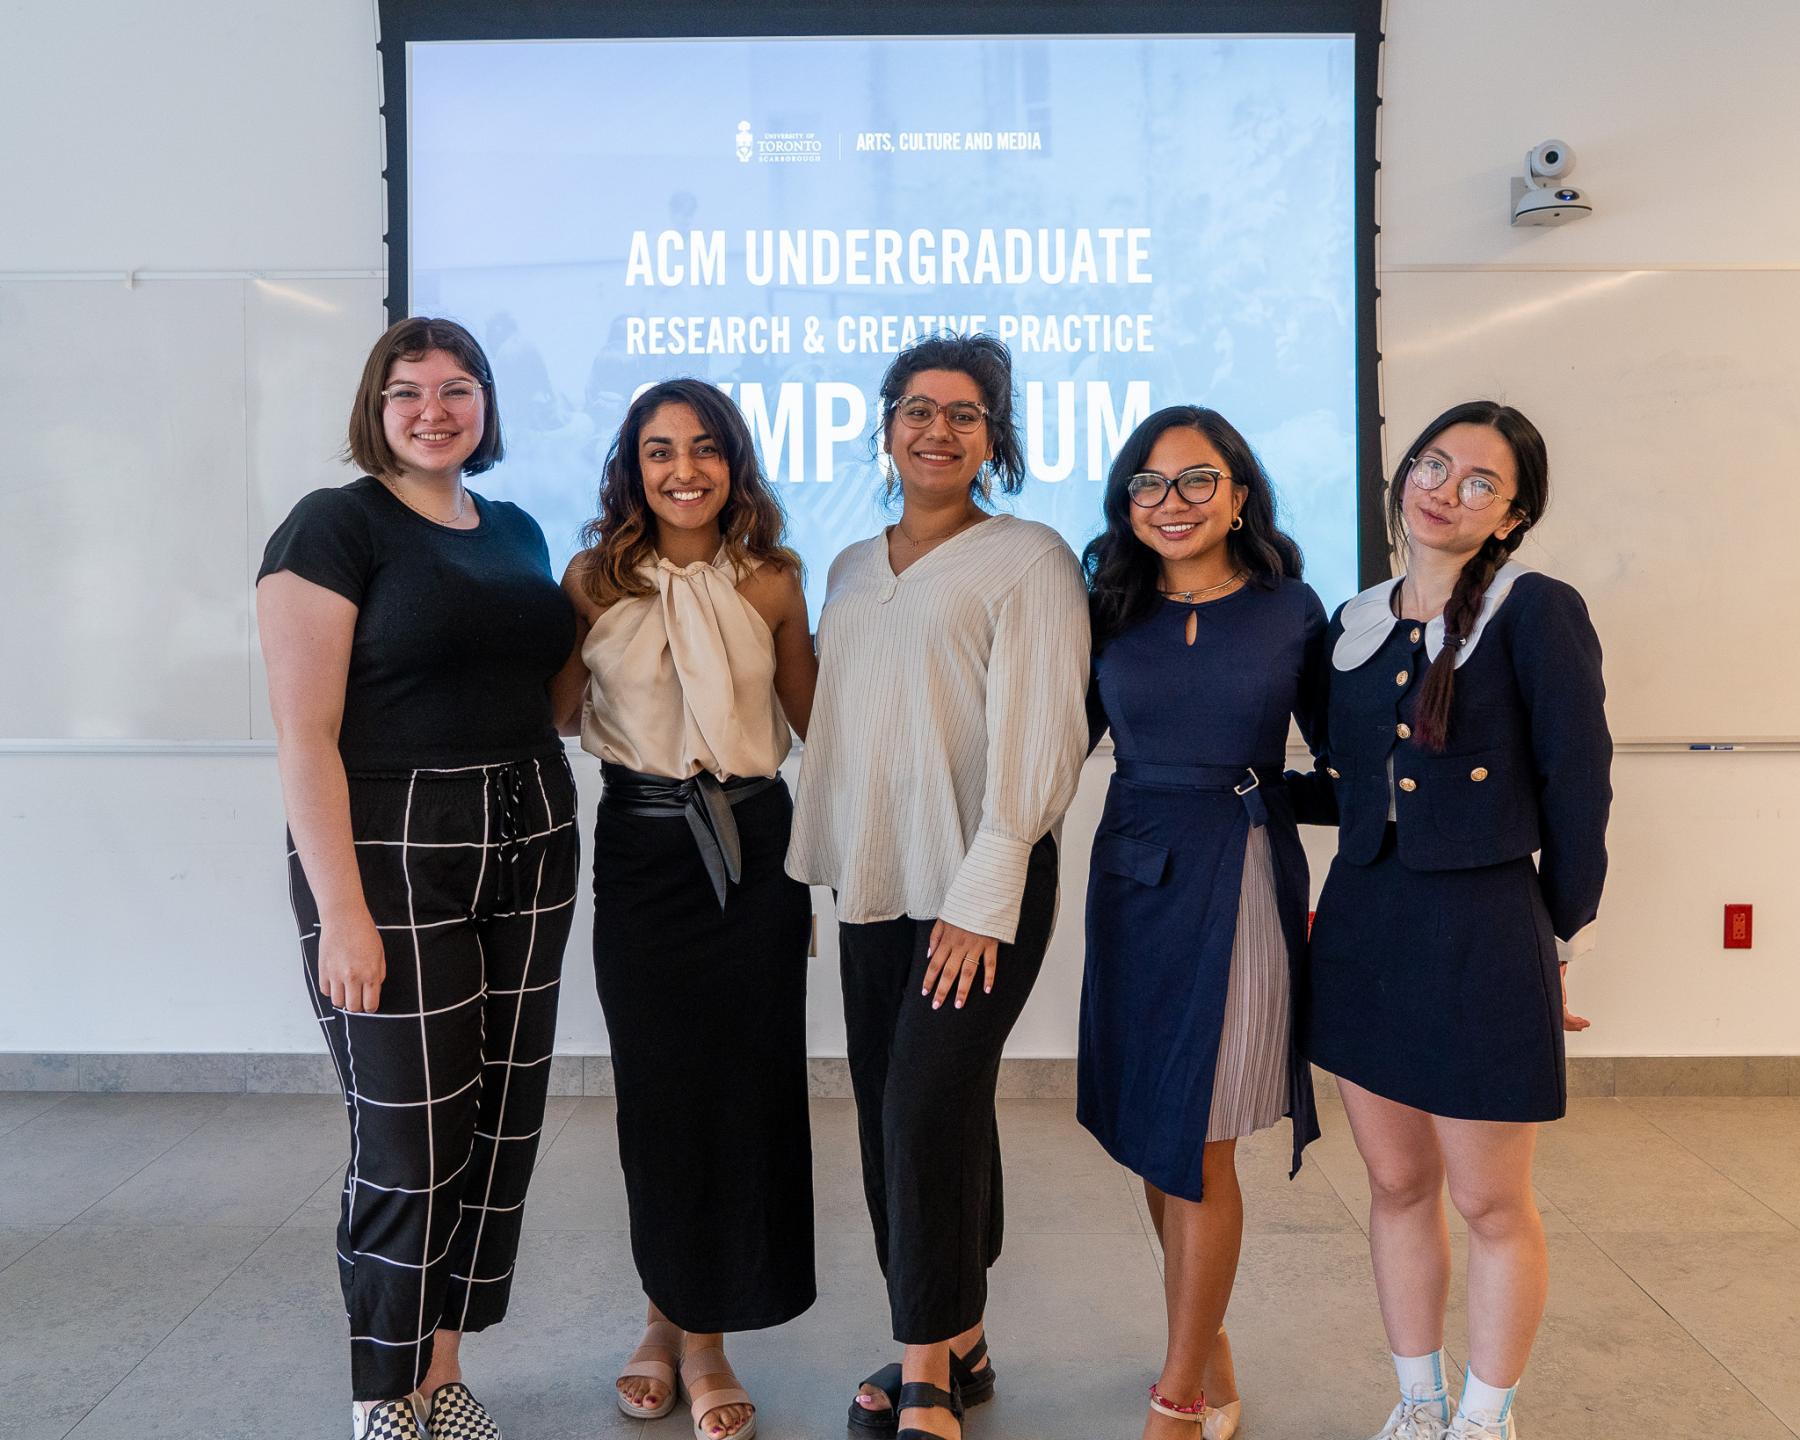 Group photo of the presenters. From left to right, Tailynn Smith Vetters, Sanah Malik, Sofia Suleman, Rachel Guanlao, Dan Pham.